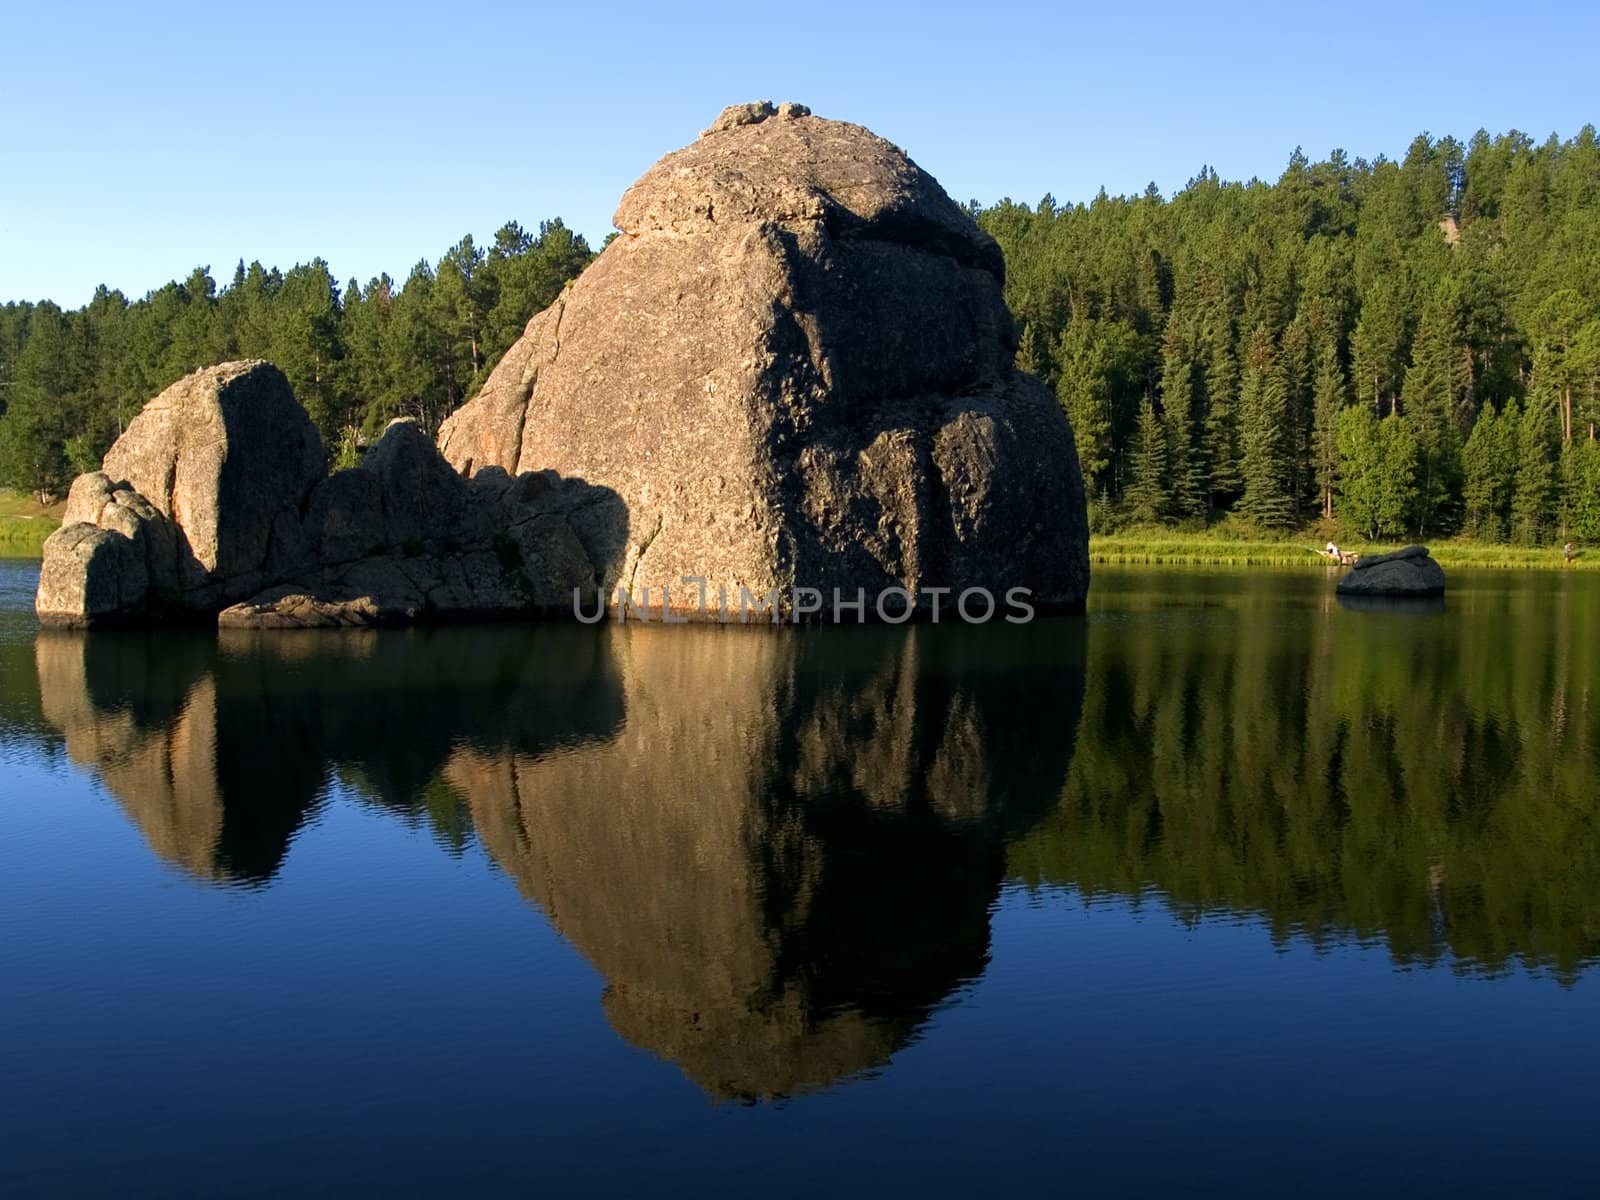 A bright morning view of the large stones in the water of Sylvan Lake in the Black hills of South Dakota.